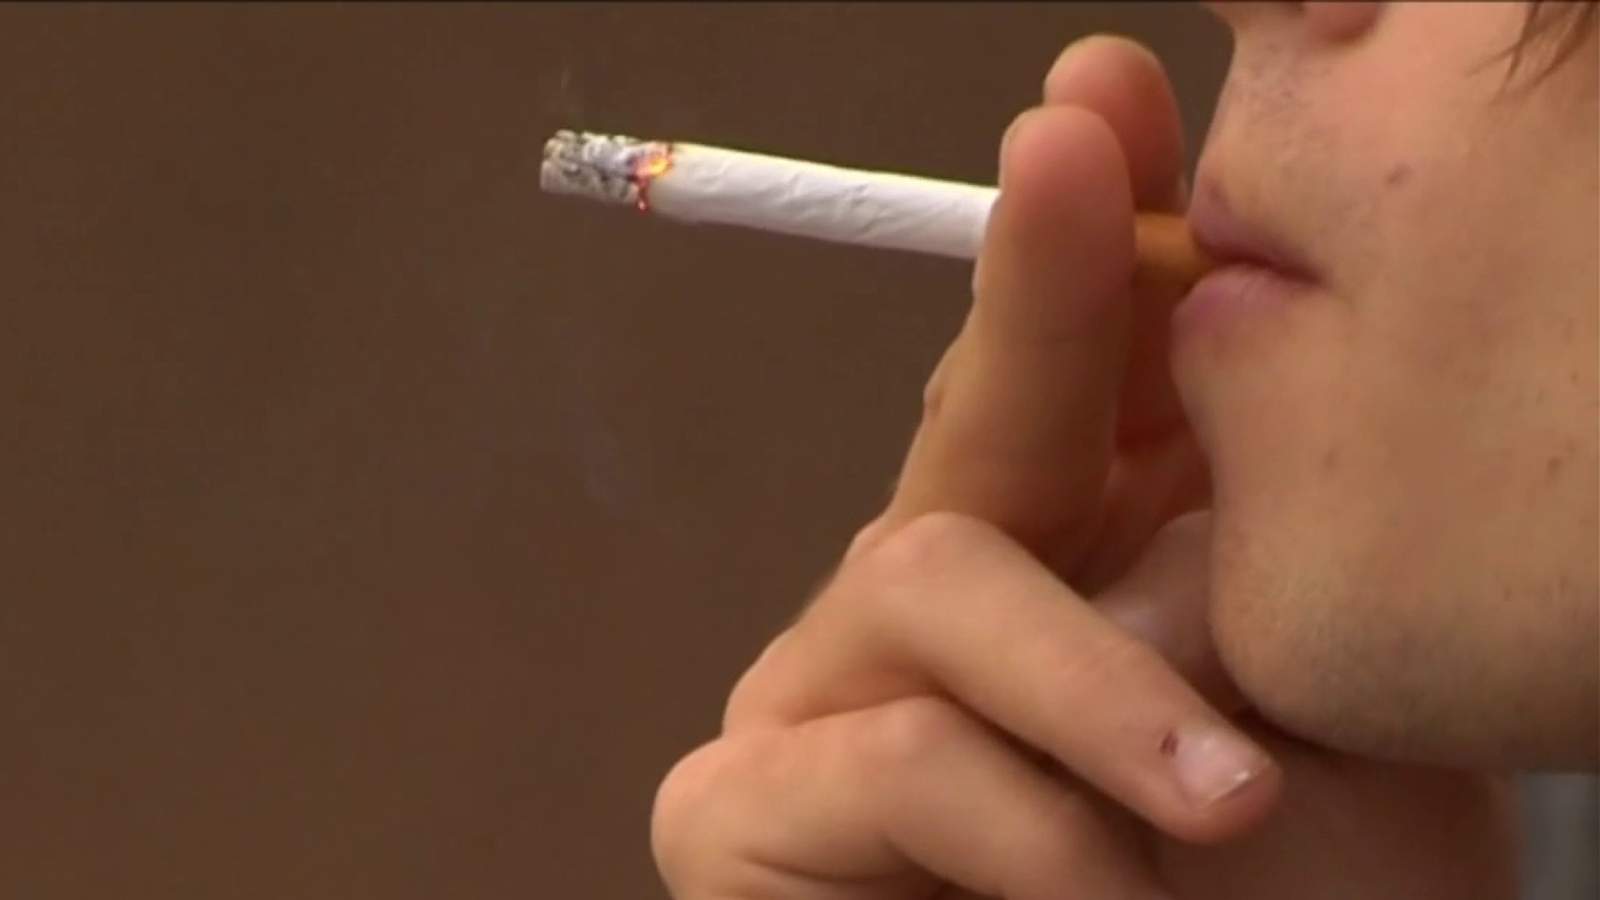 Report gives Virginia all failing grades in efforts to reduce tobacco use